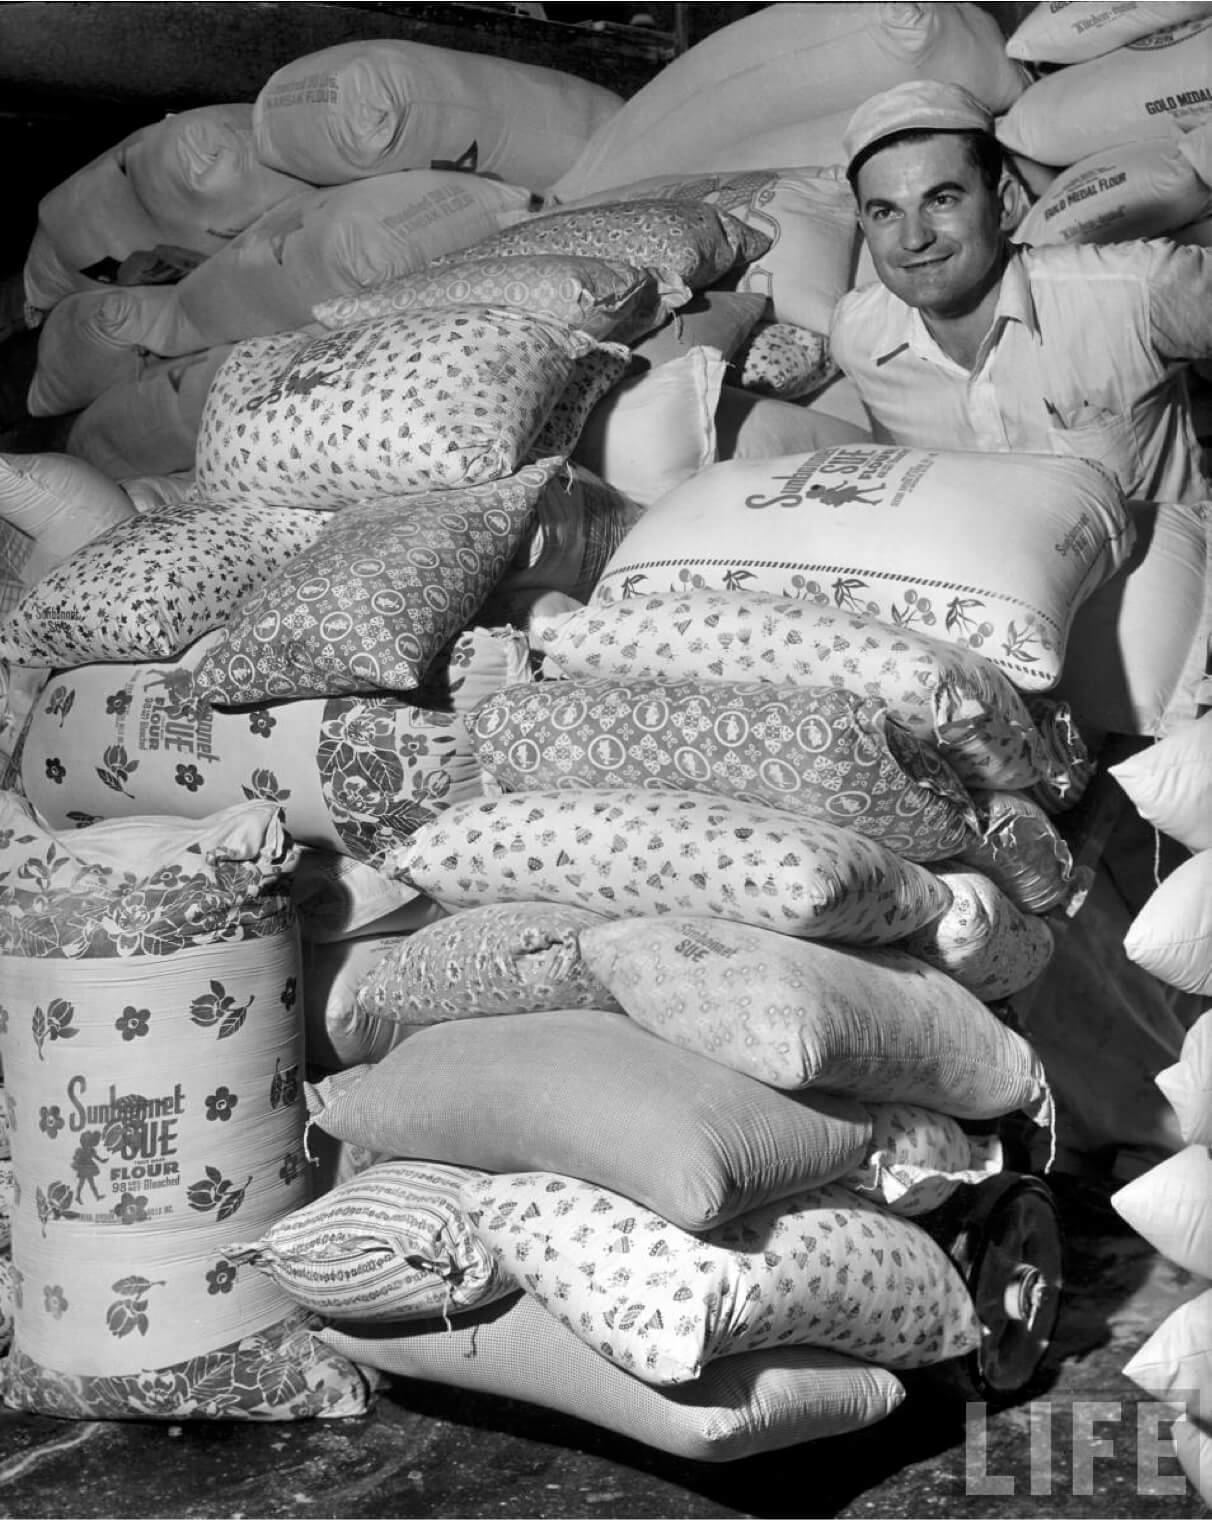 When they realized women were using their sacks to make clothes for their children, flour mills of the 1930s started using flowered fabric for their sacks. (1939)